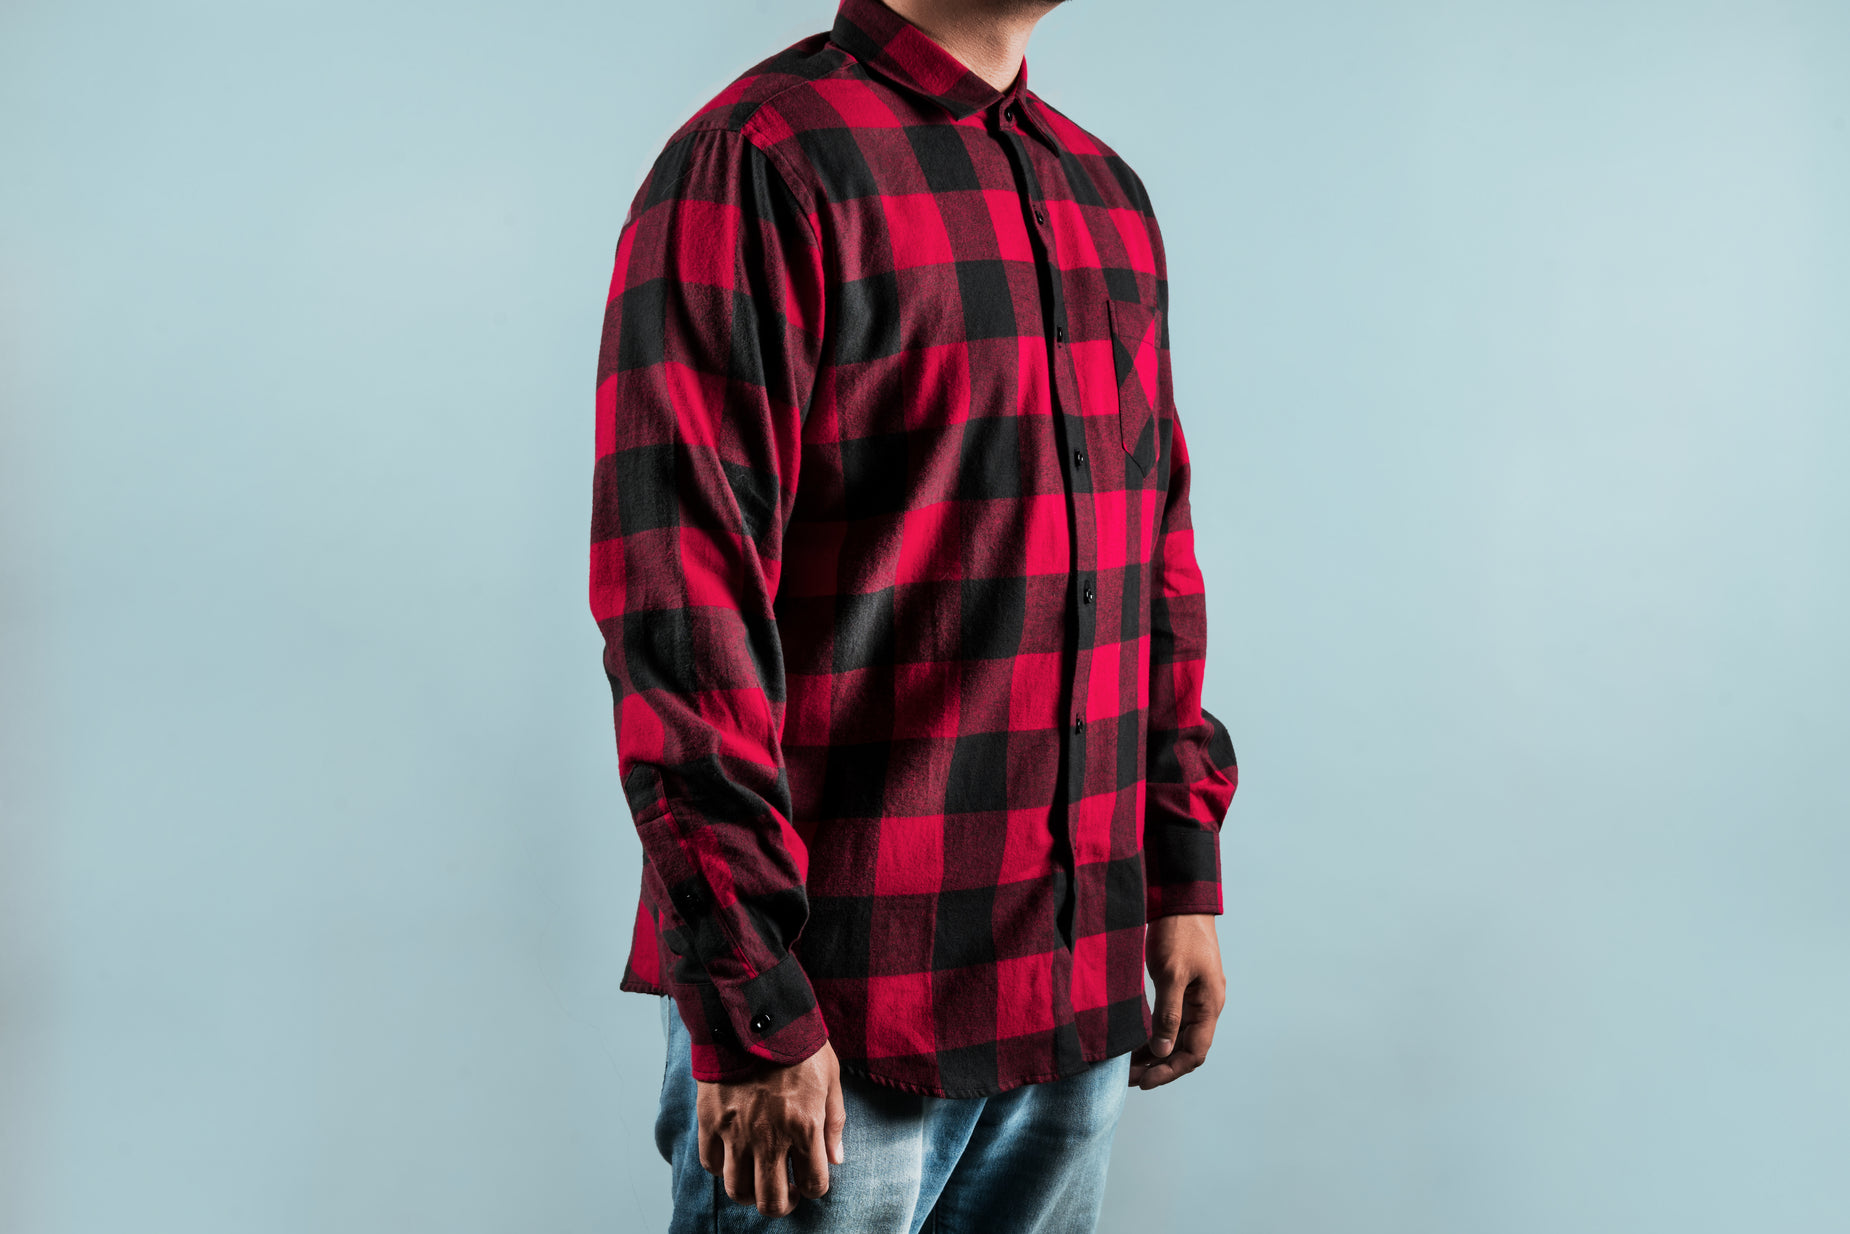 a man standing and looking off to the side wearing a red and black checkered shirt